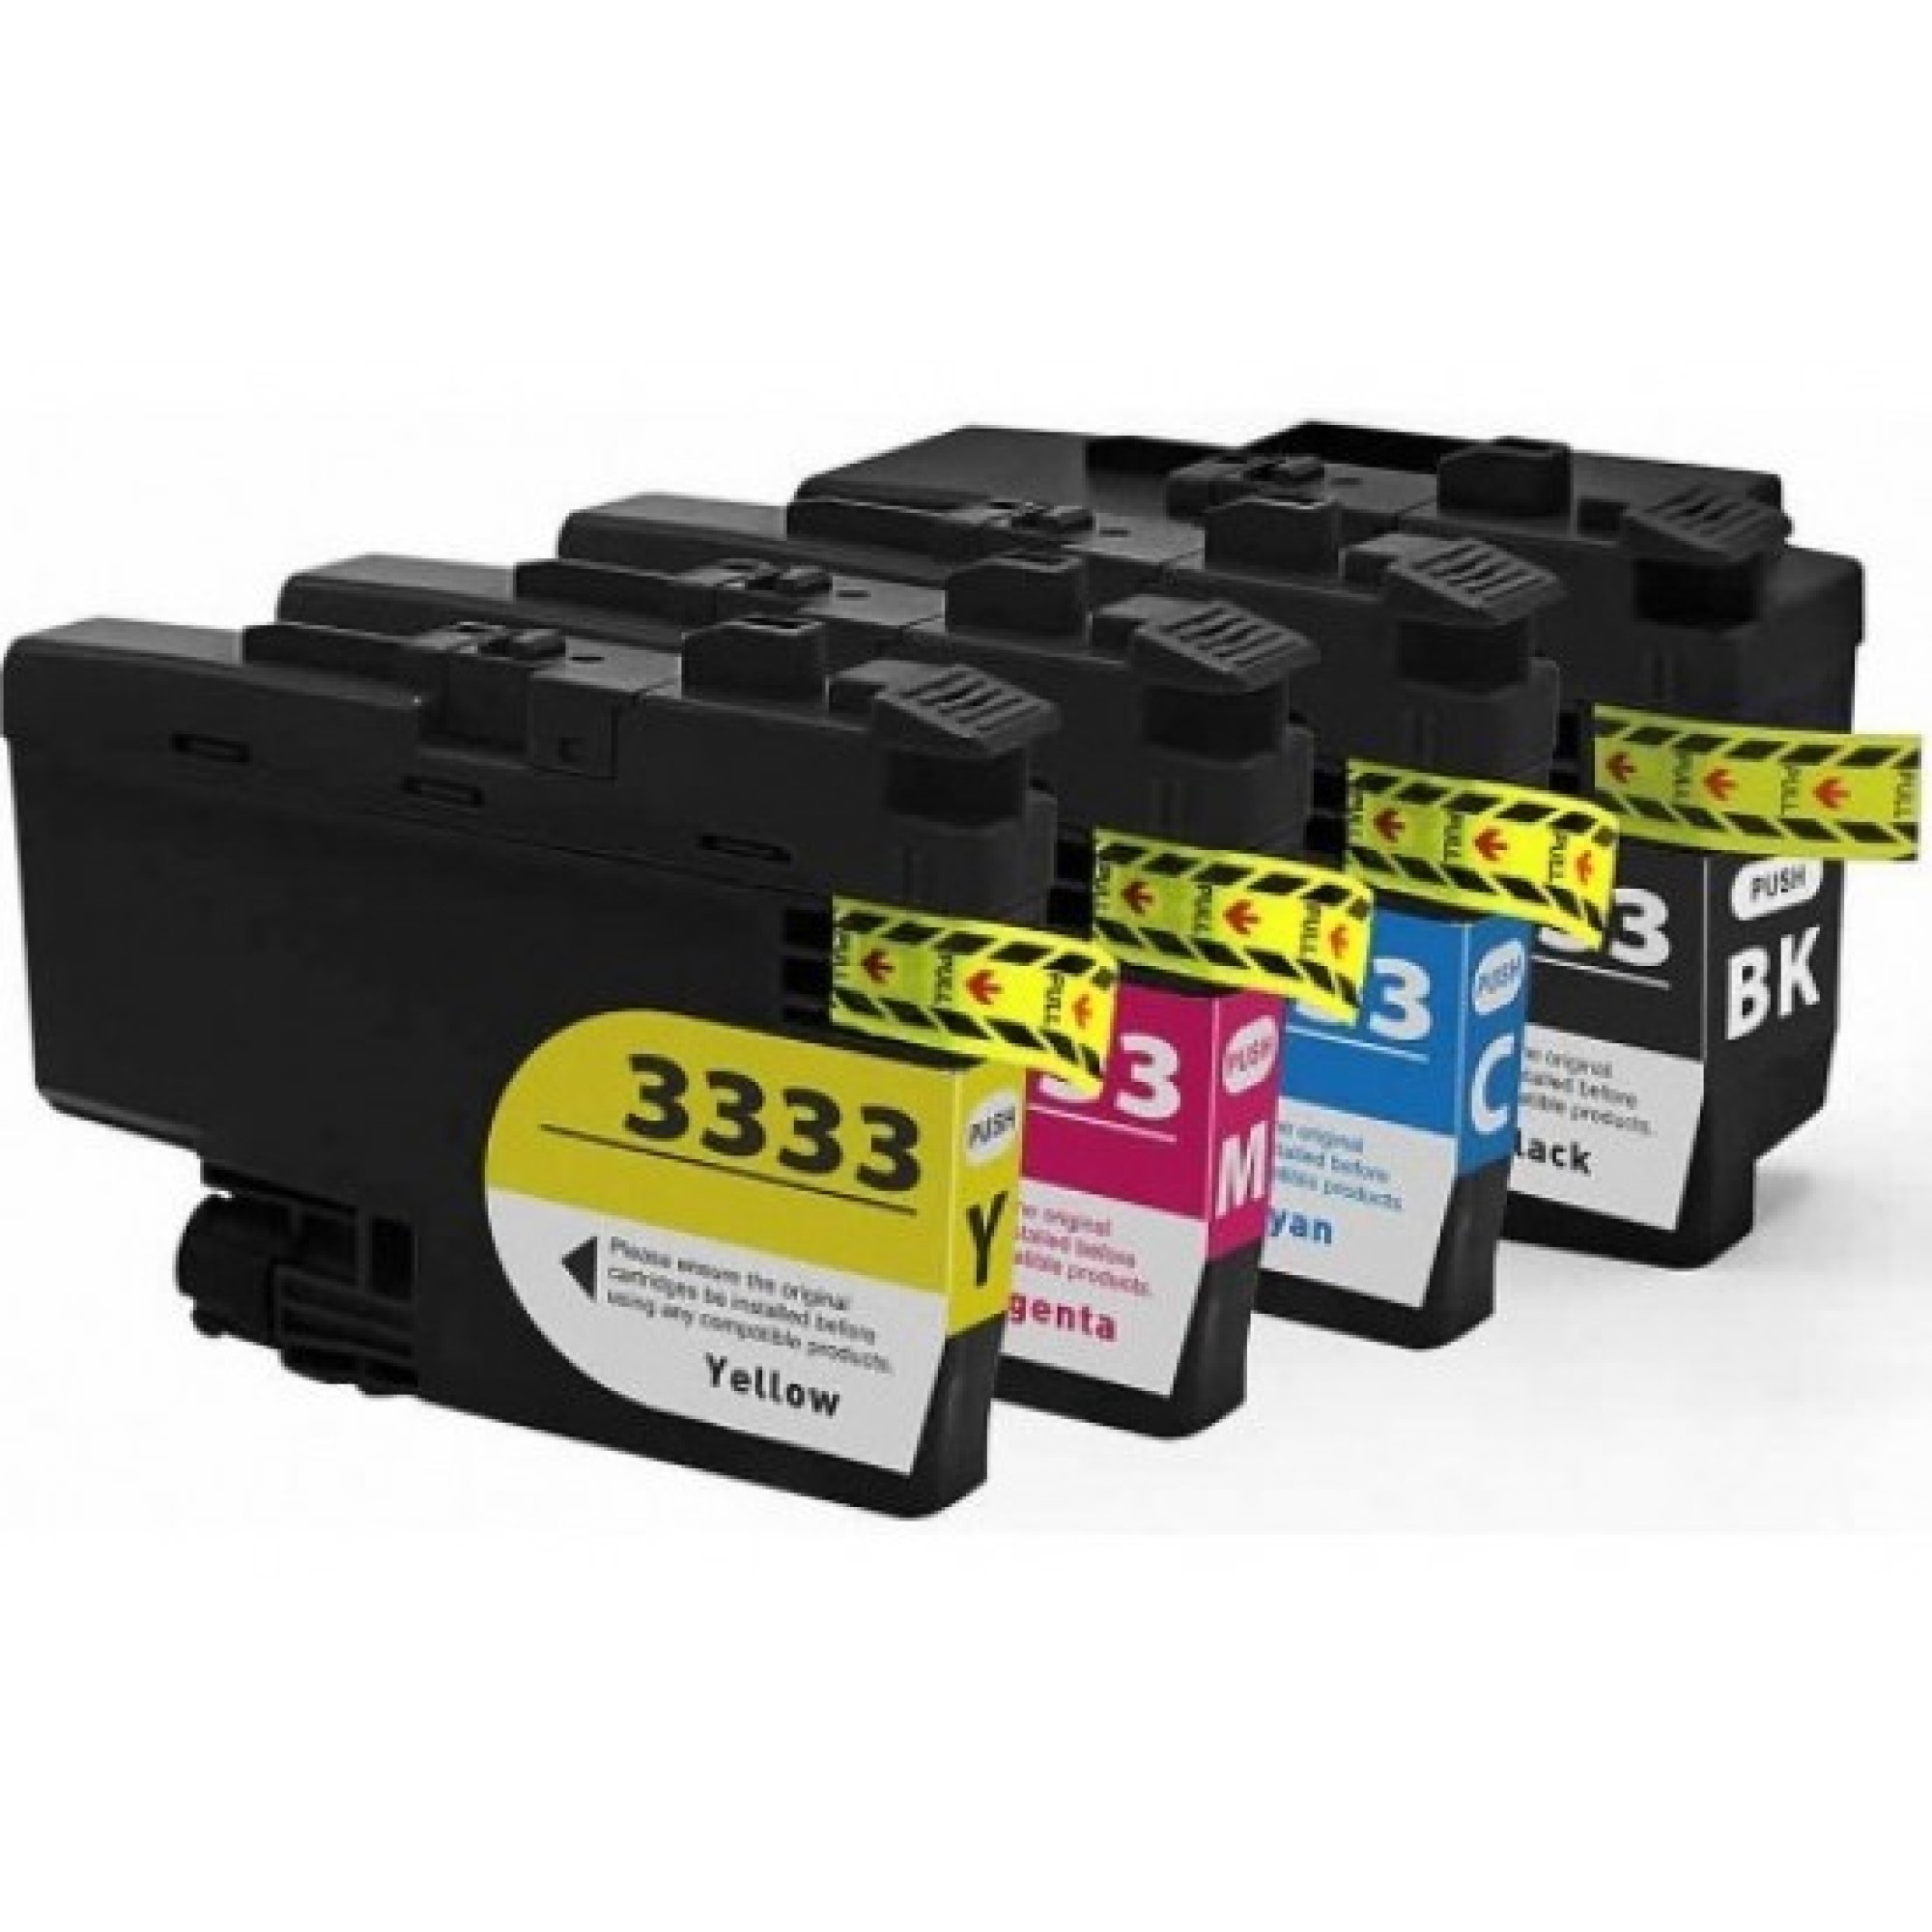 Brother-lc3333-Ink-Cartridge-Yellow